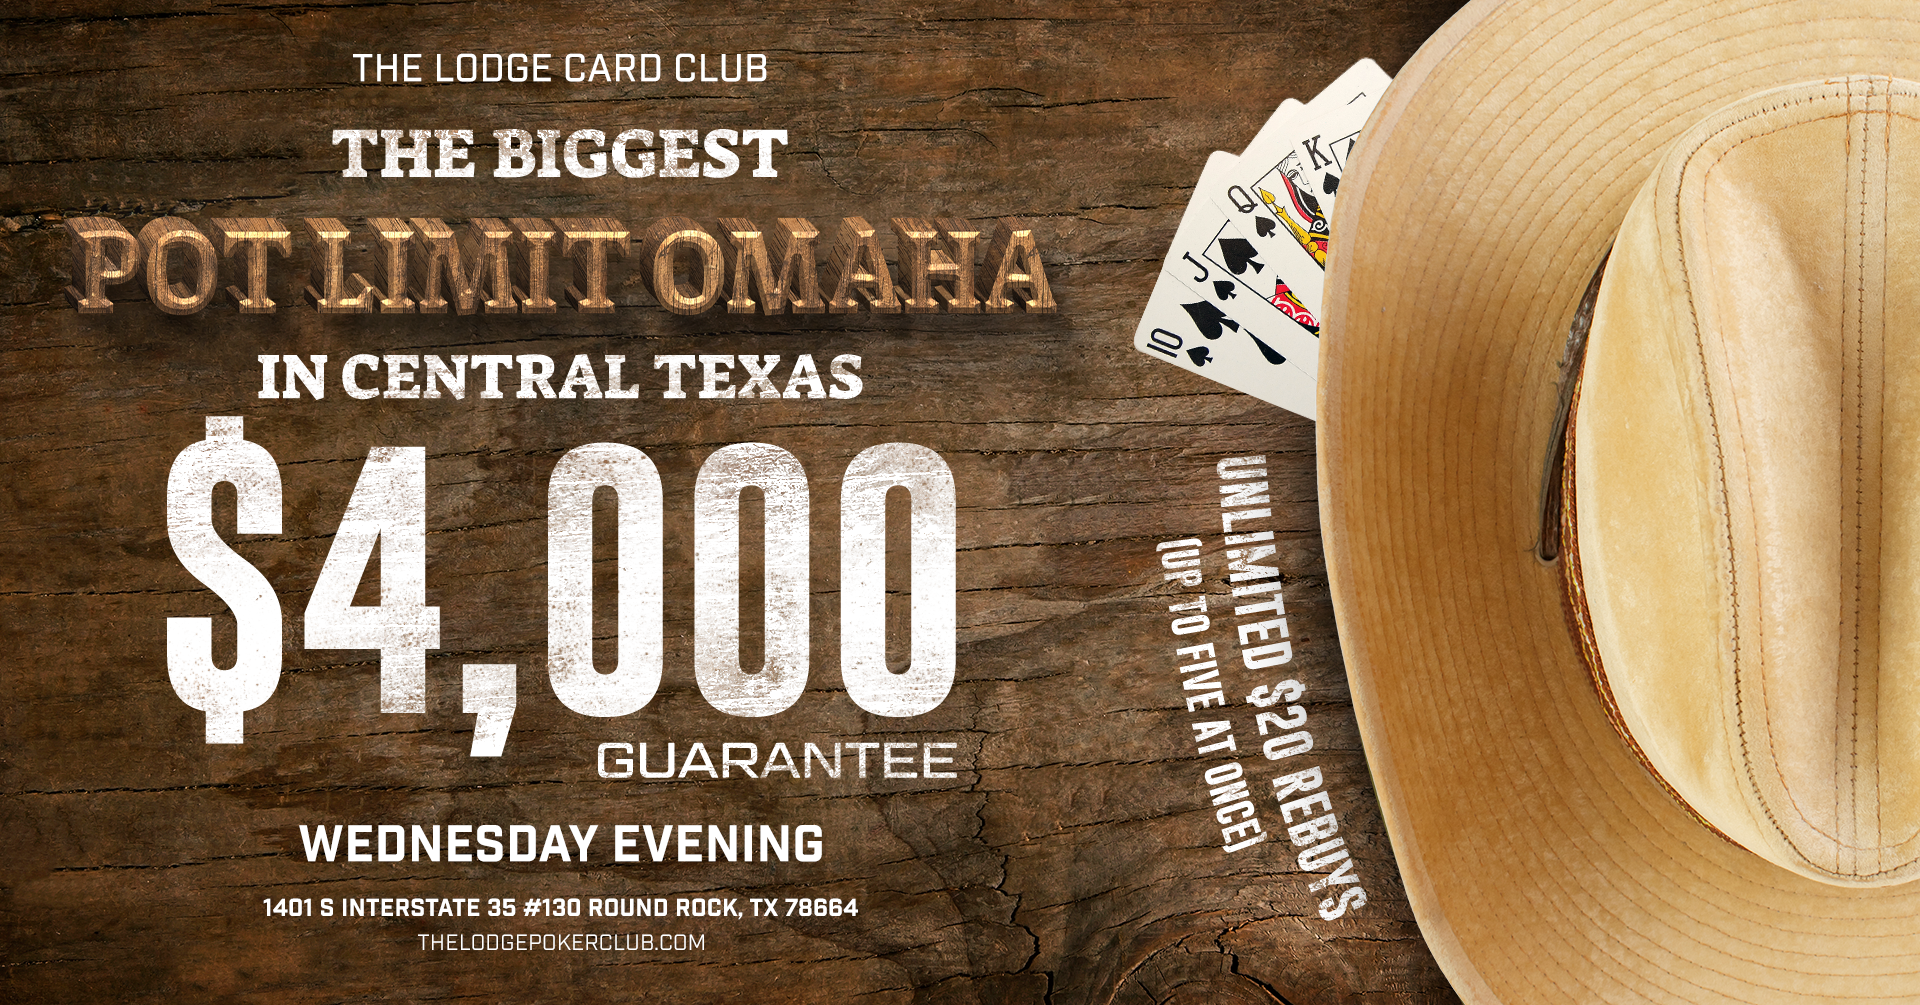 https://thelodgepokerclub.com/wp-content/uploads/2022/03/The-Biggest-PLO-Freeroll-in-Central-Texas-1920x1005-1.png